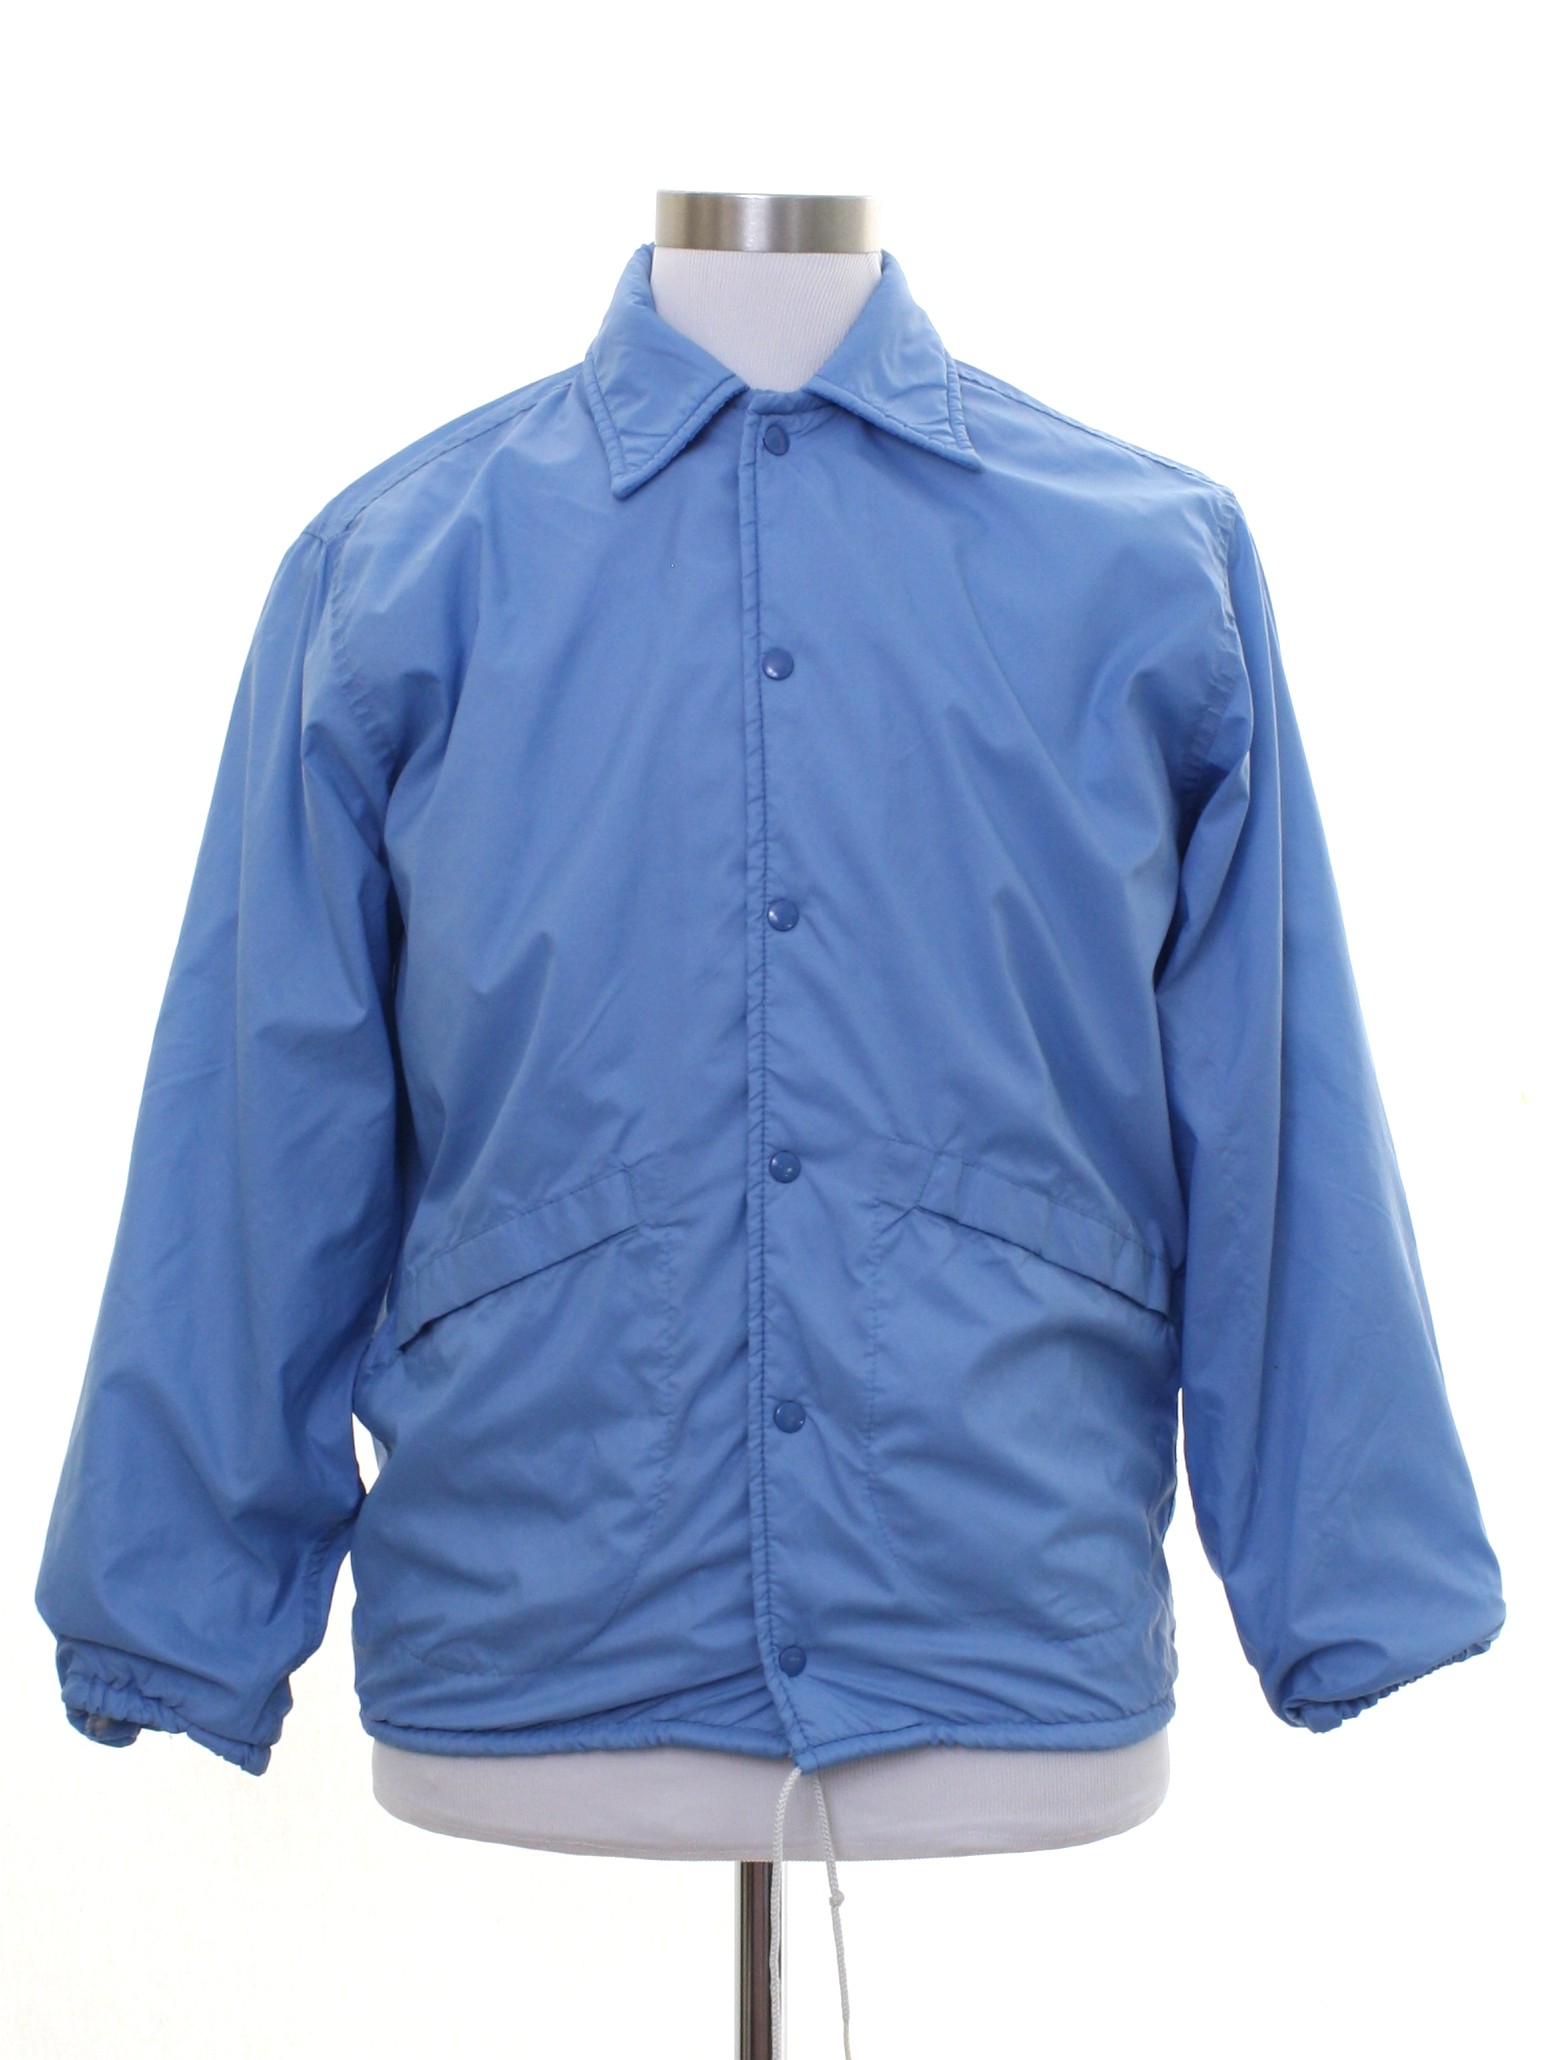 Vintage 1970's Jacket: Late 70s or Early 80s -Pla-Jac- Mens sky blue ...